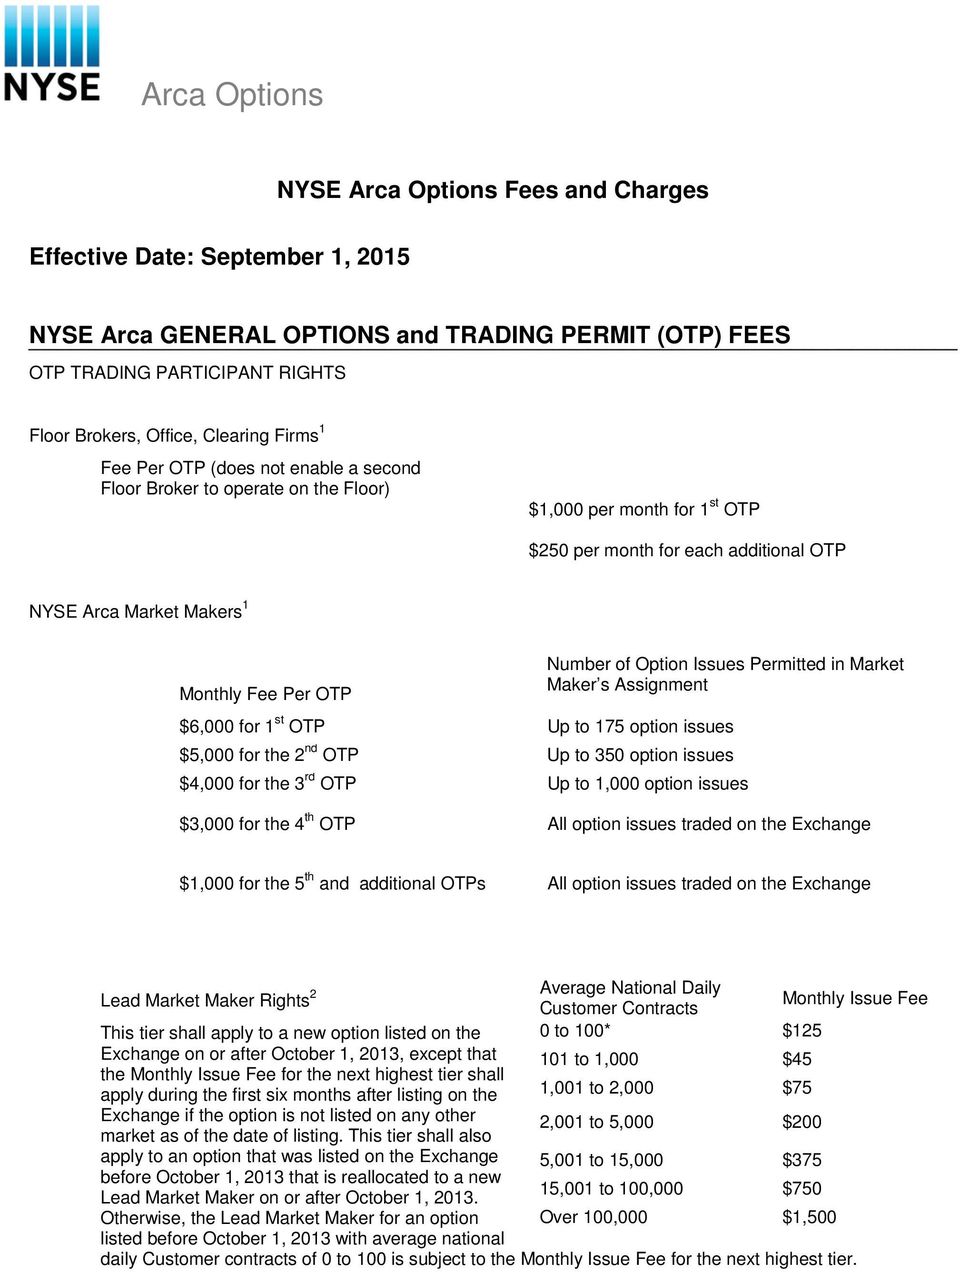 Per OTP Number of Option Issues Permitted in Market Maker s Assignment $6,000 for 1 st OTP Up to 175 option issues $5,000 for the 2 nd OTP Up to 350 option issues $4,000 for the 3 rd OTP Up to 1,000